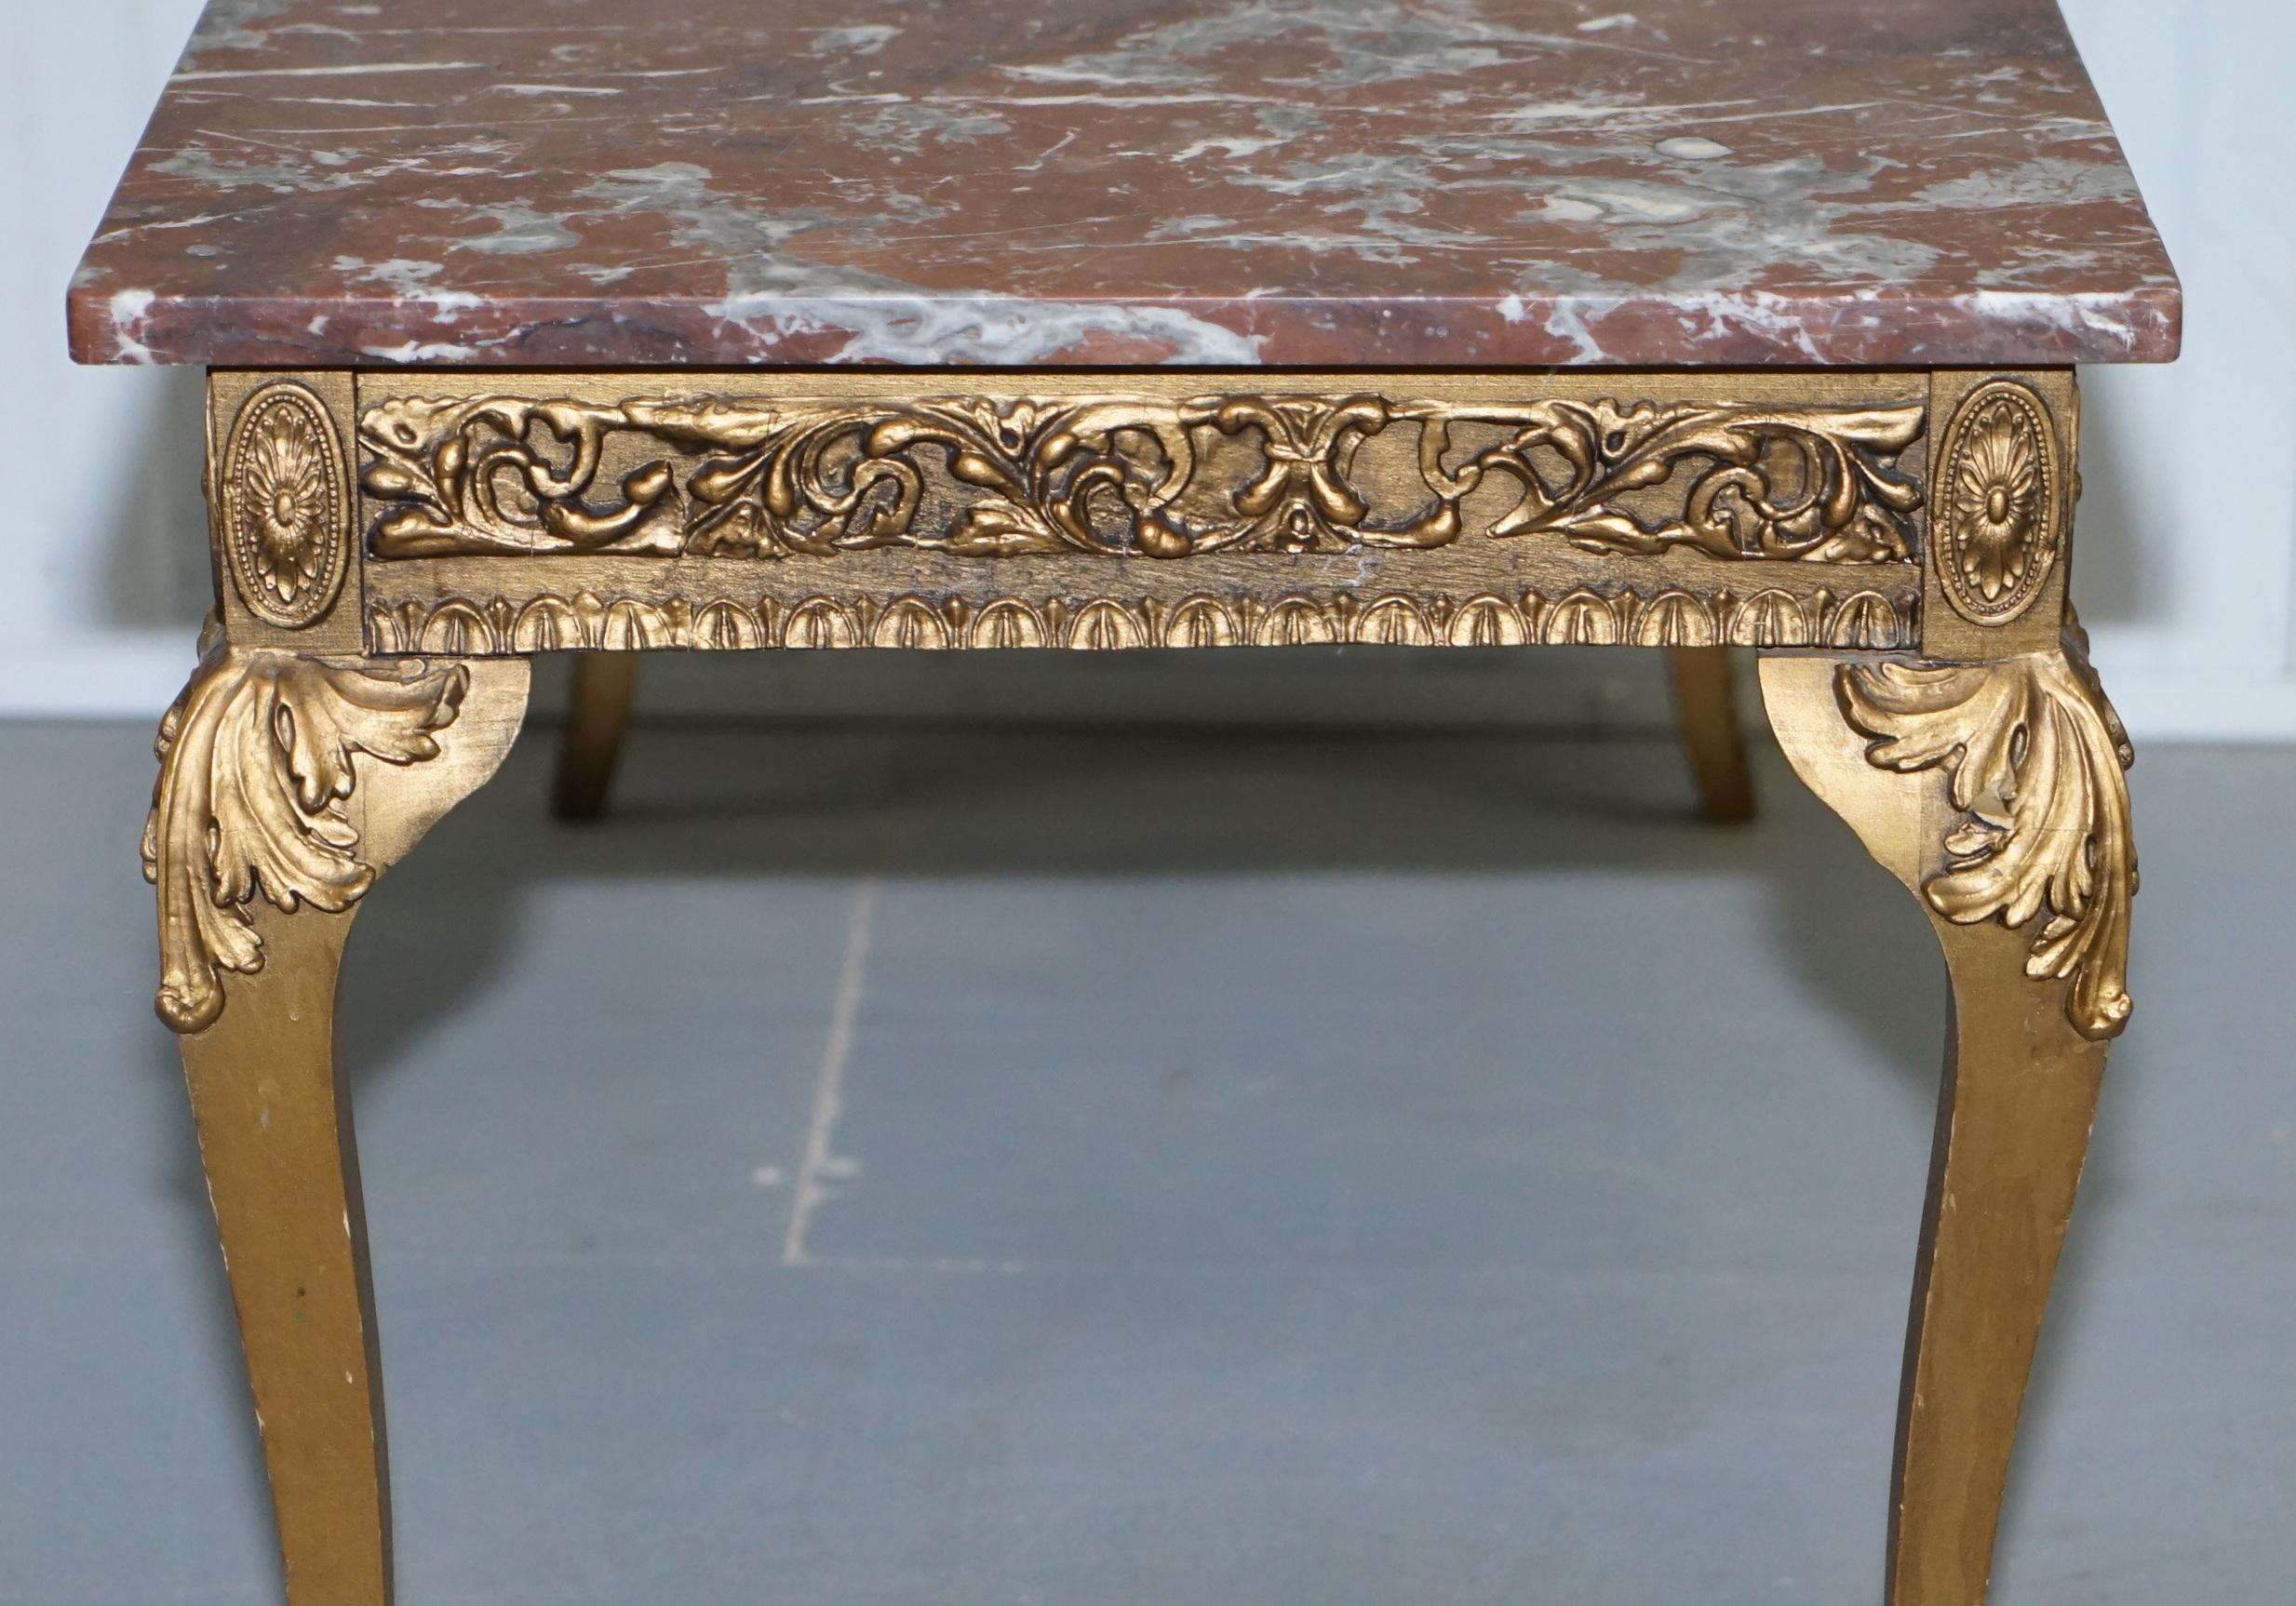 Rouge Marble Topped French Giltwood Coffee Table Heavy Rococo Baroque Carving 14